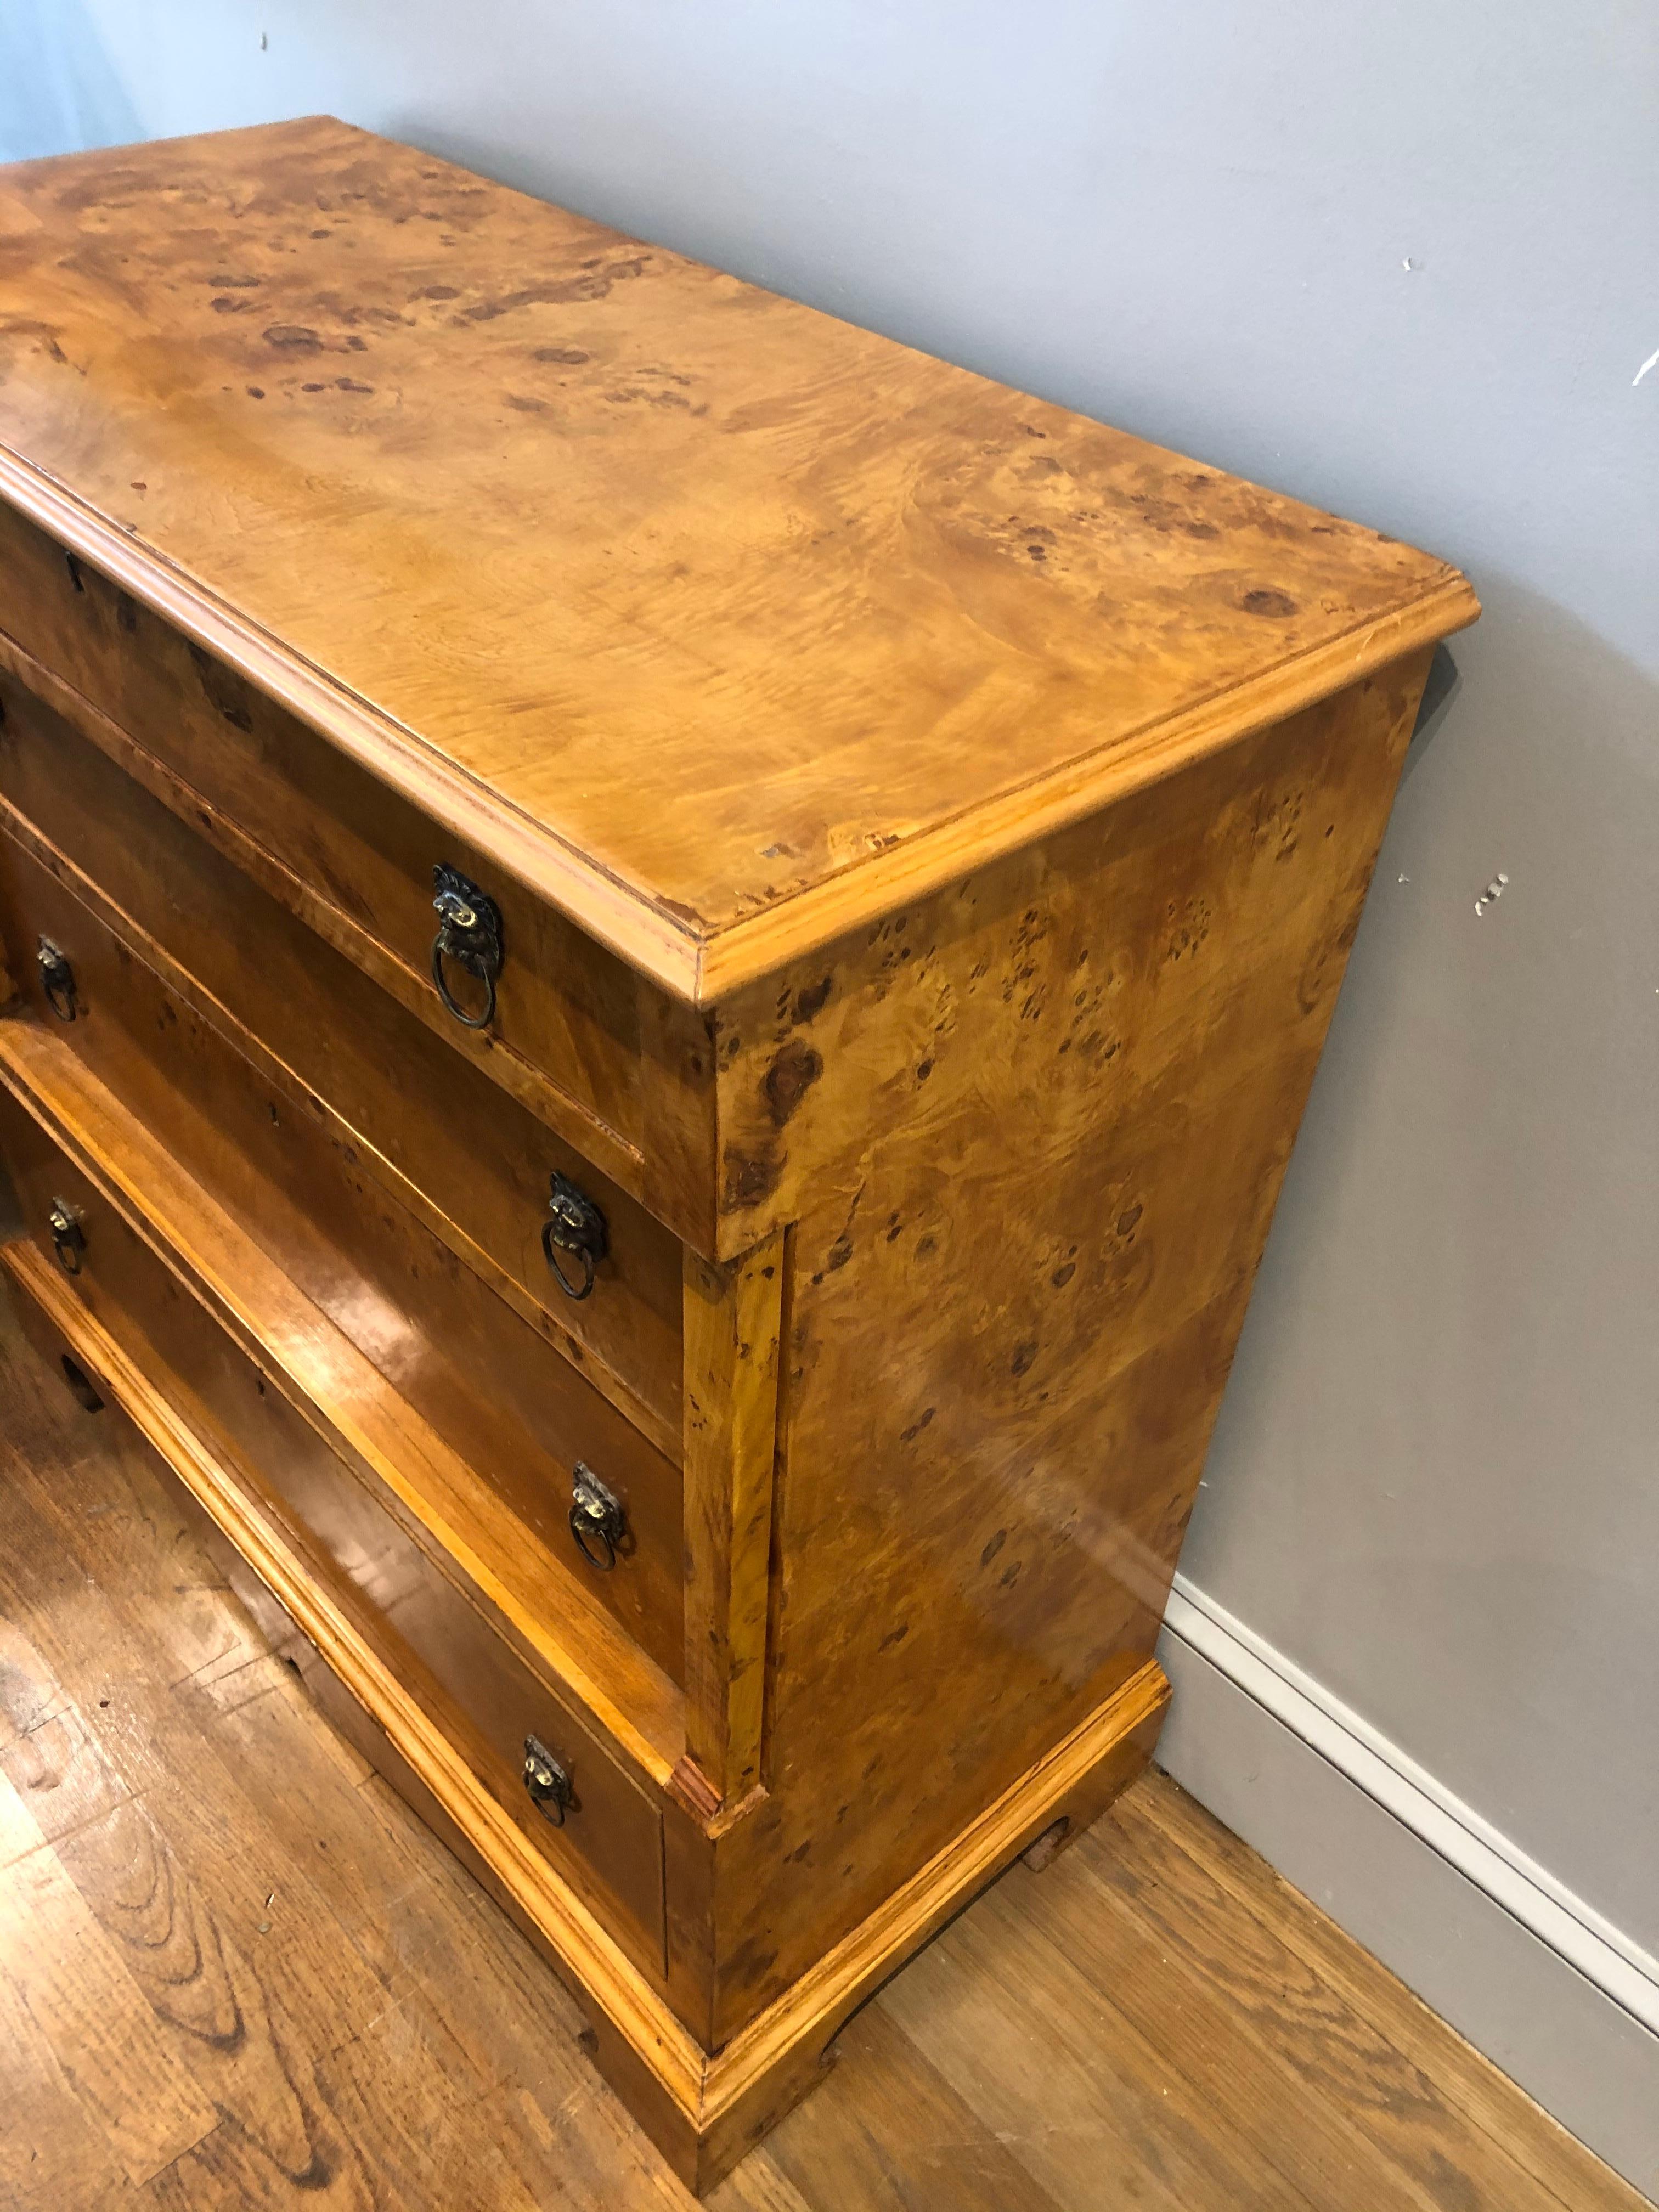 Fine pair of late 19th century Biedermeier chest of drawers. Made of highly figured “bookmatched” burled ash. Good proportions and unusual form with four drawers over decorative bracket feet. Made in Germany, circa 1880.